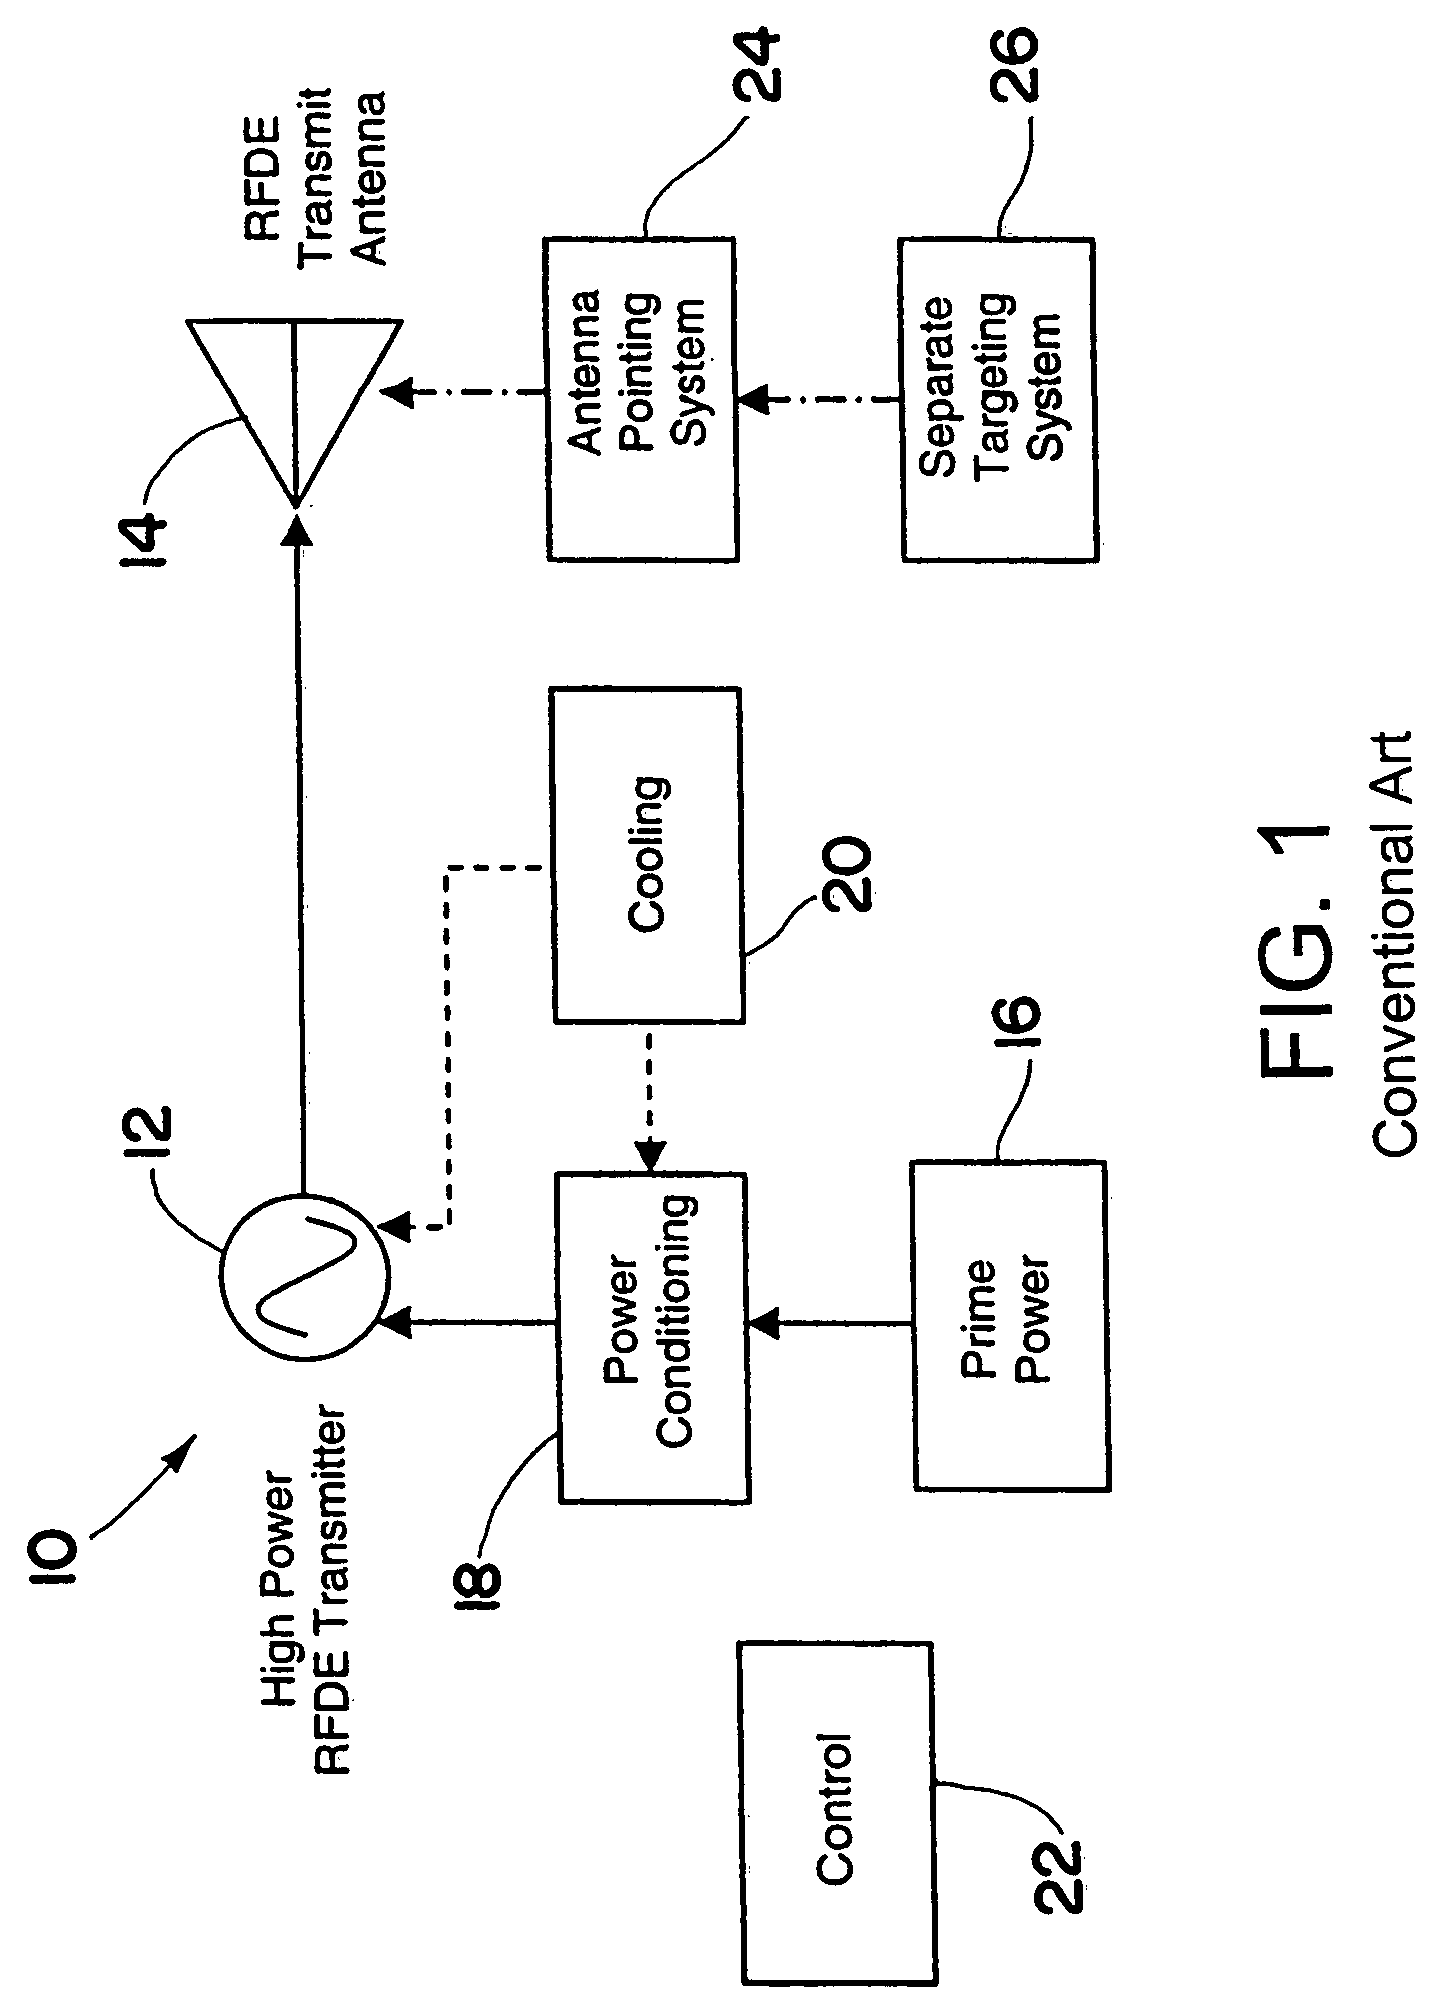 Multifunctional radio frequency directed energy system